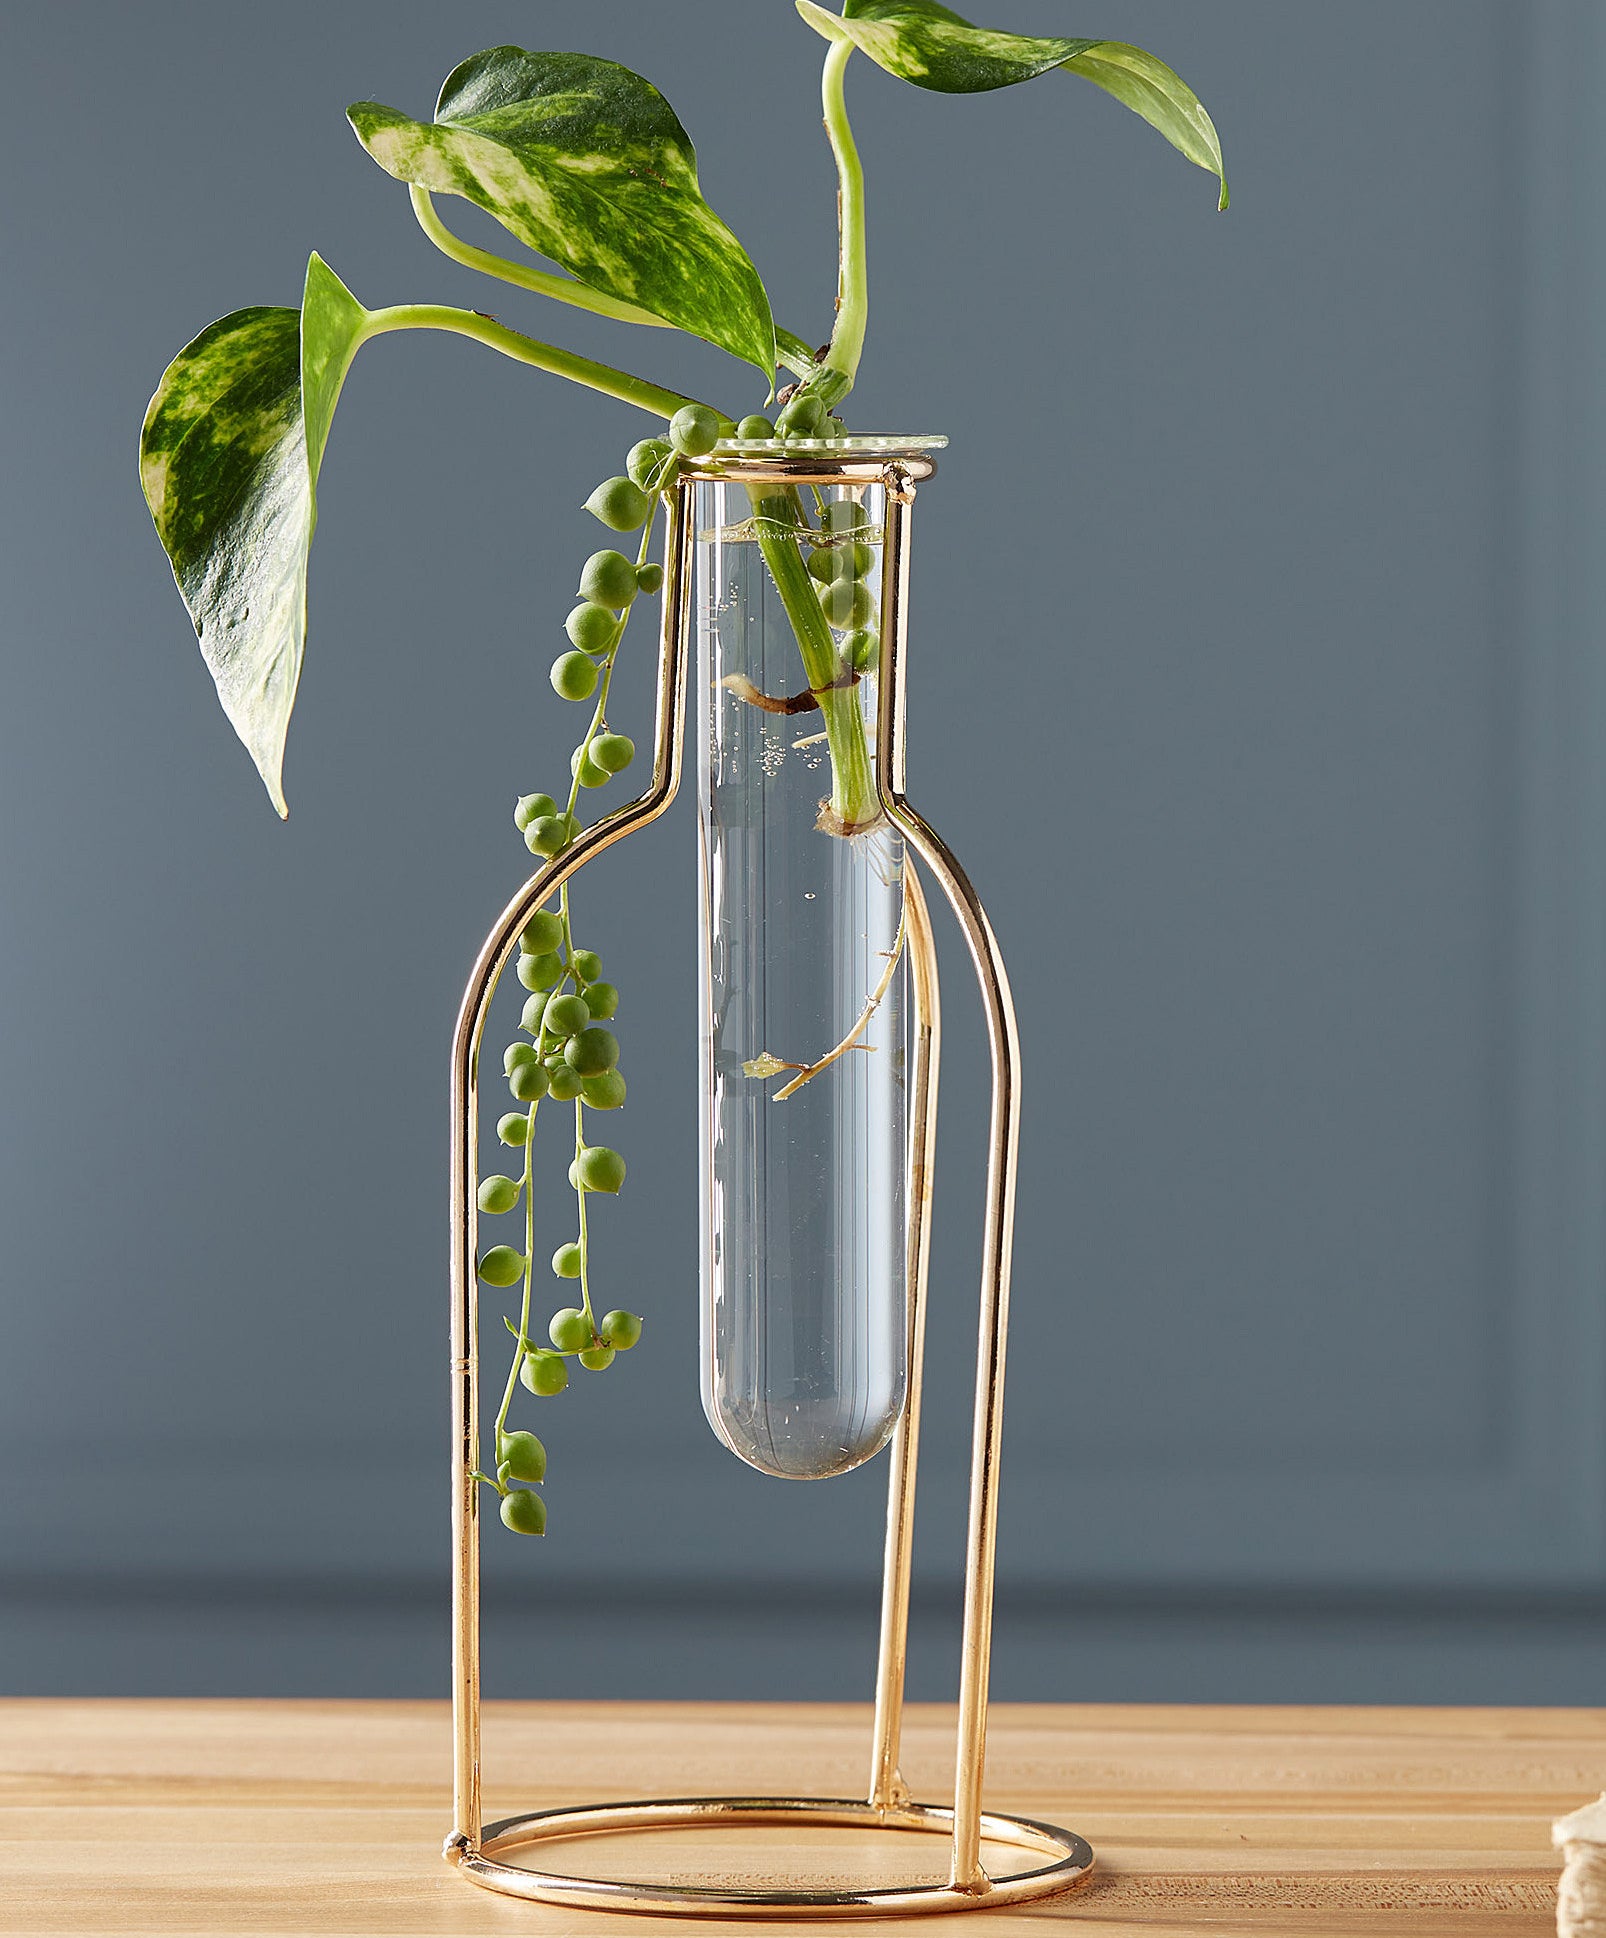 Plant clippings in the vial vase